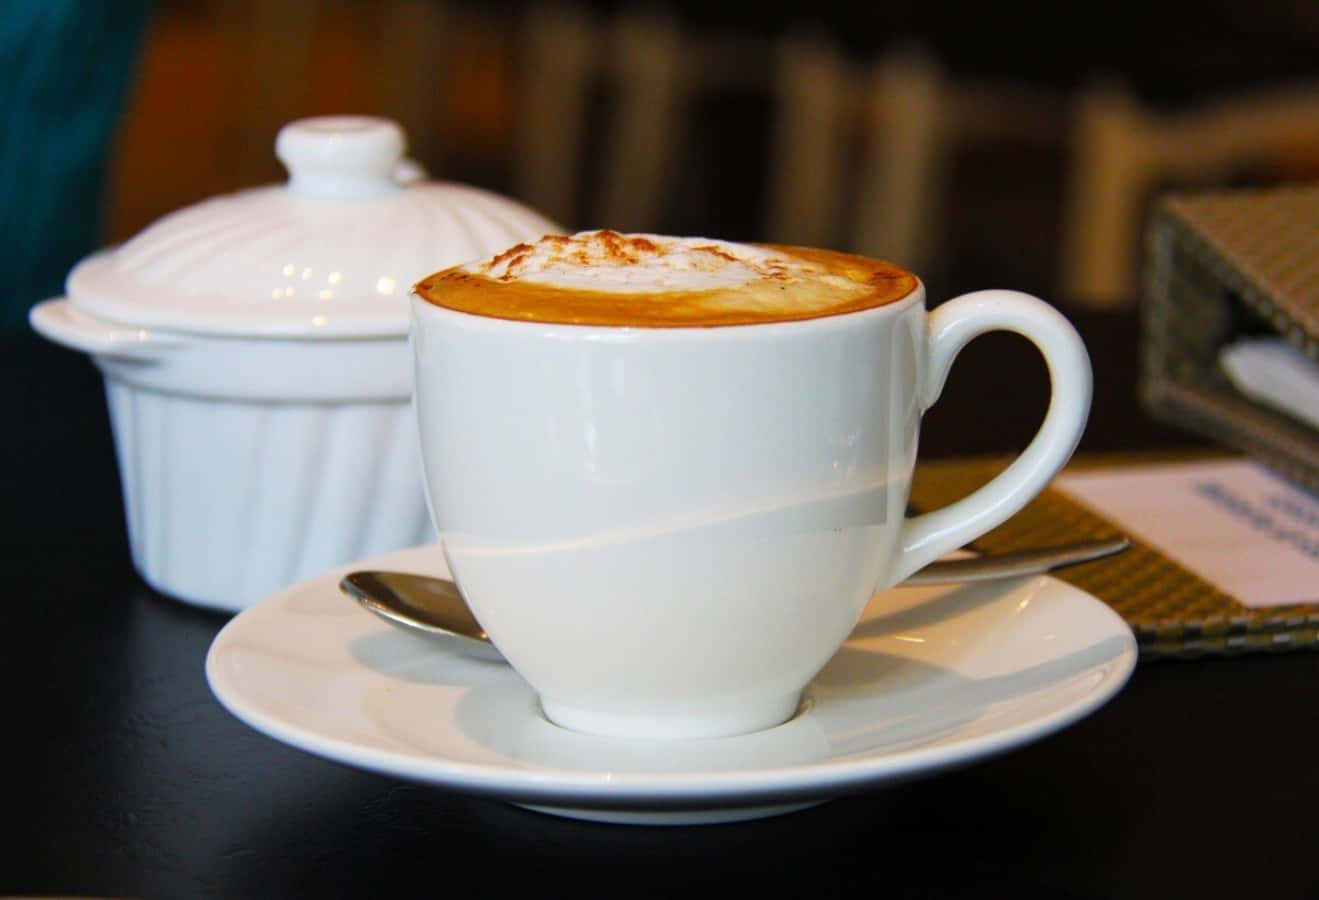 A White Cup Of Coffee With A Saucer On A Table